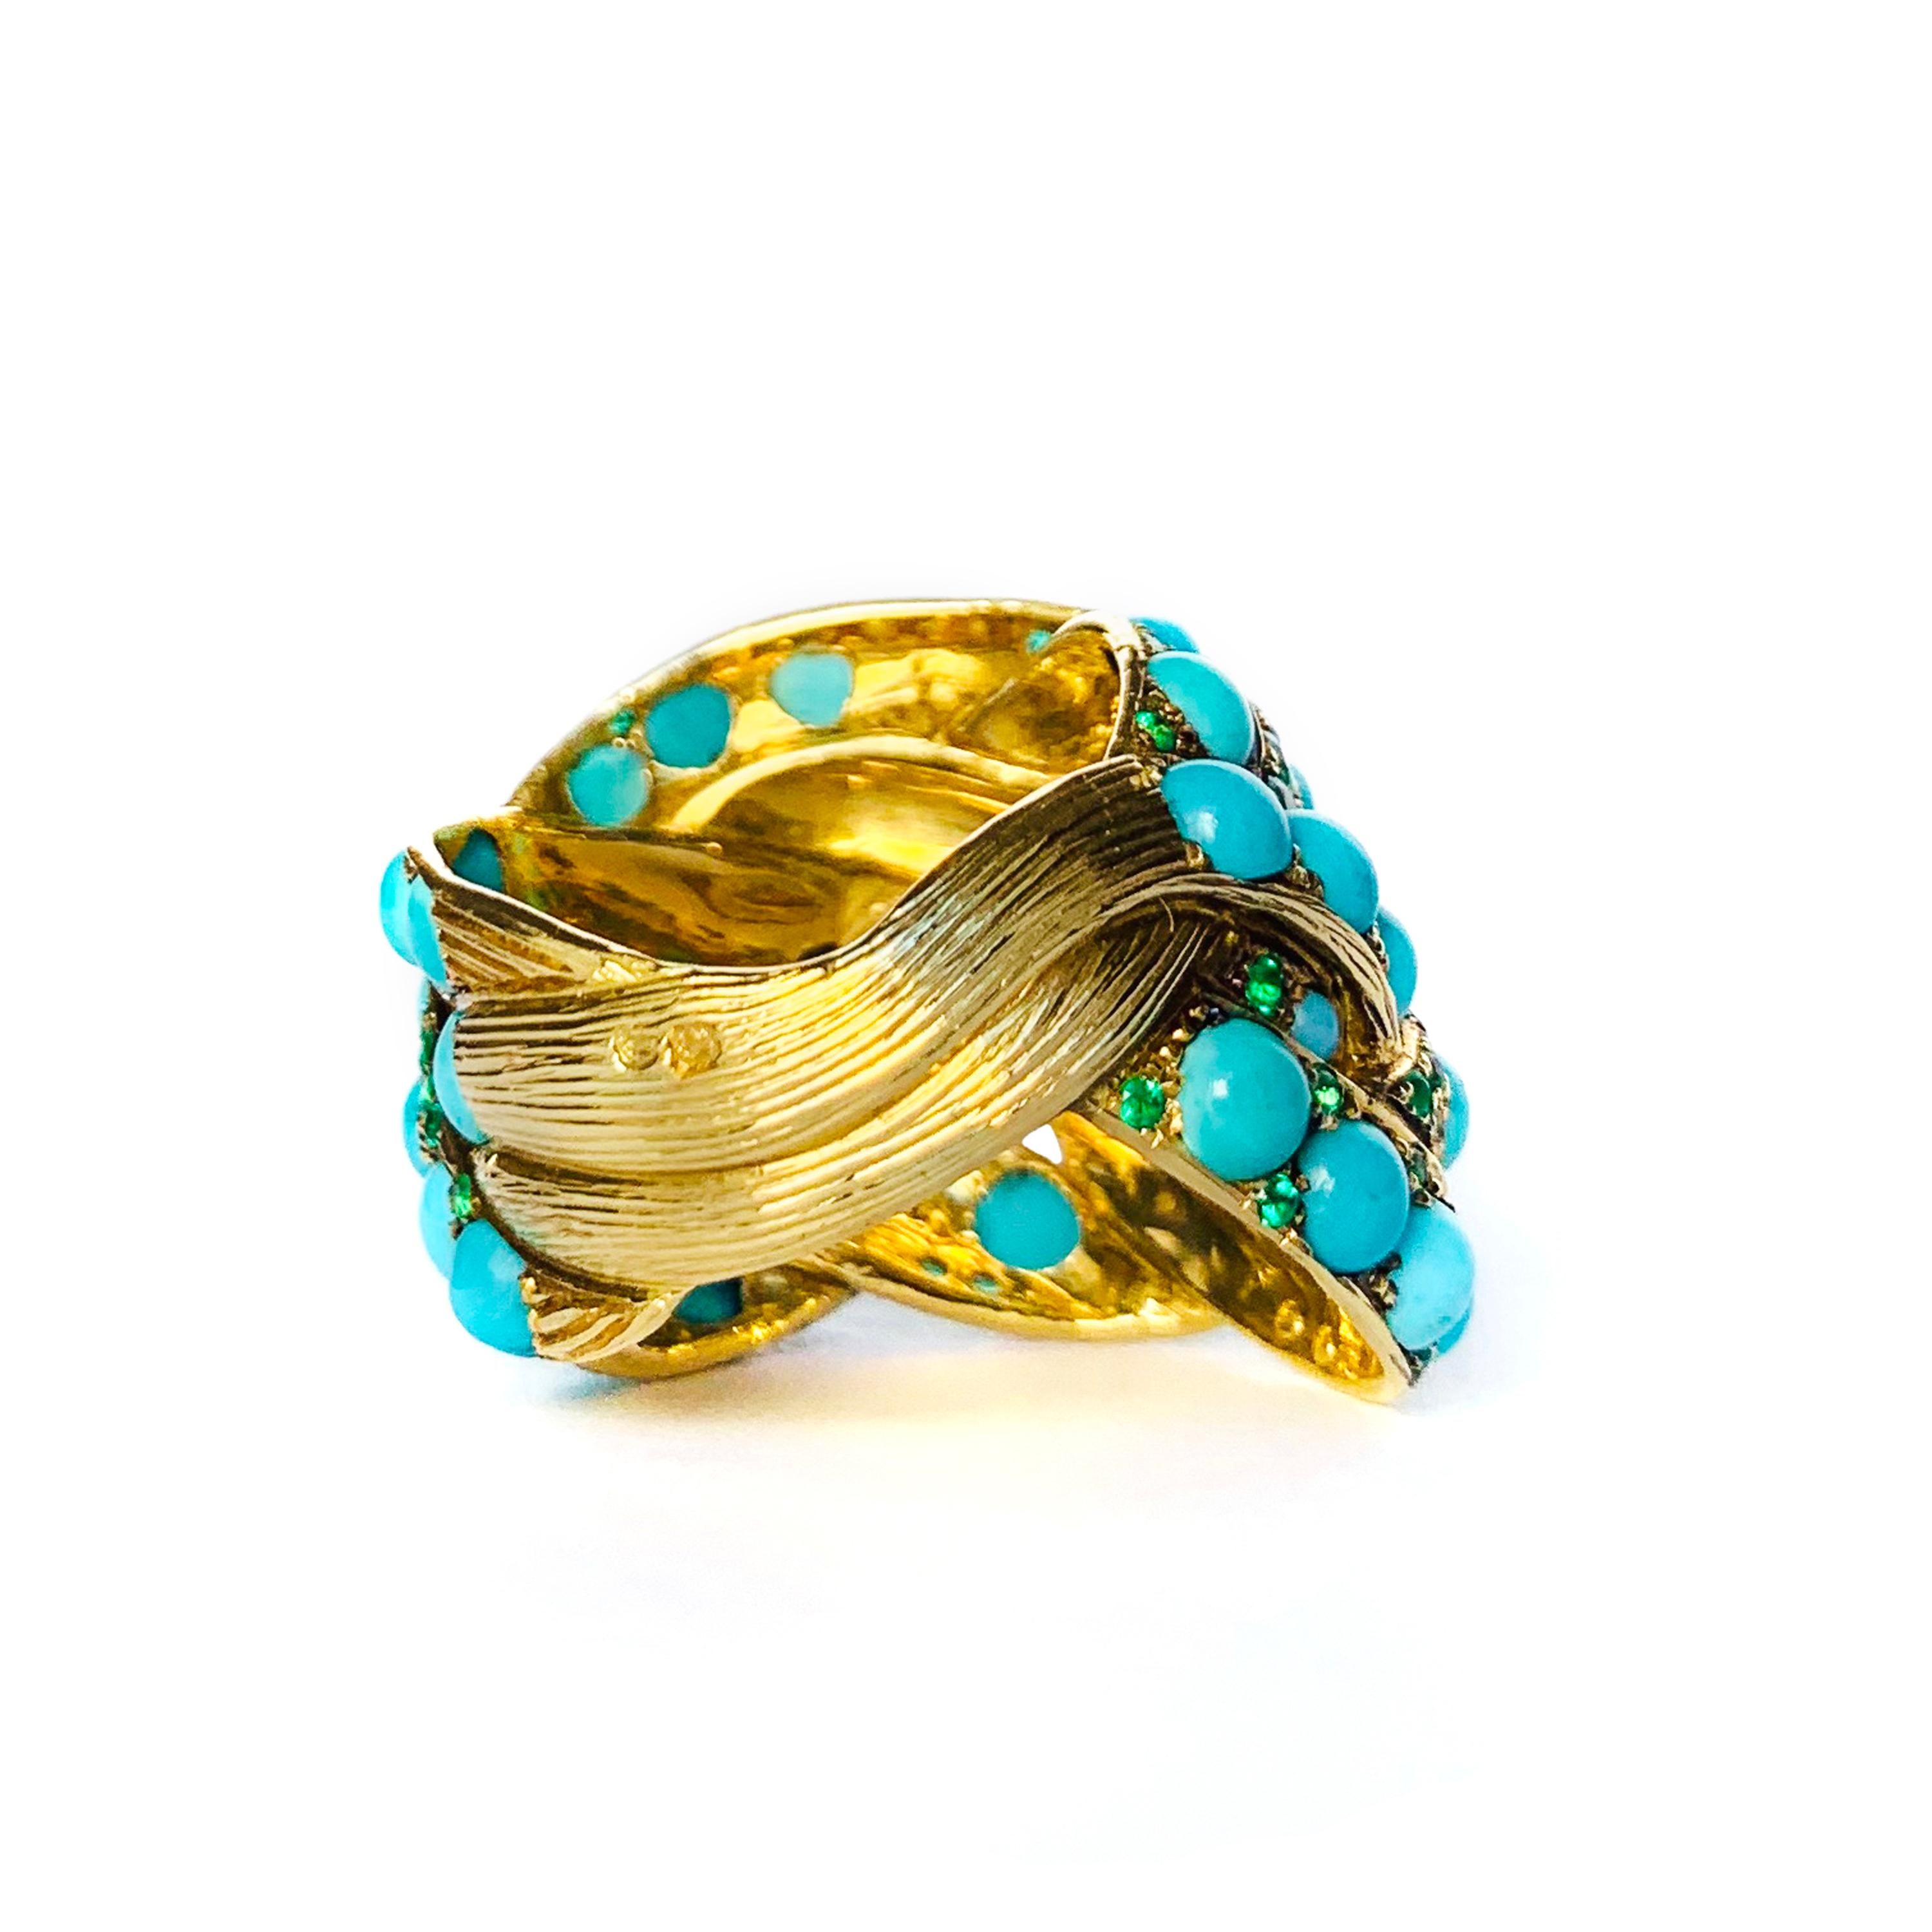 Contemporary Rosior one-off Turquoise and Emerald Cocktail Ring set in Yellow Gold